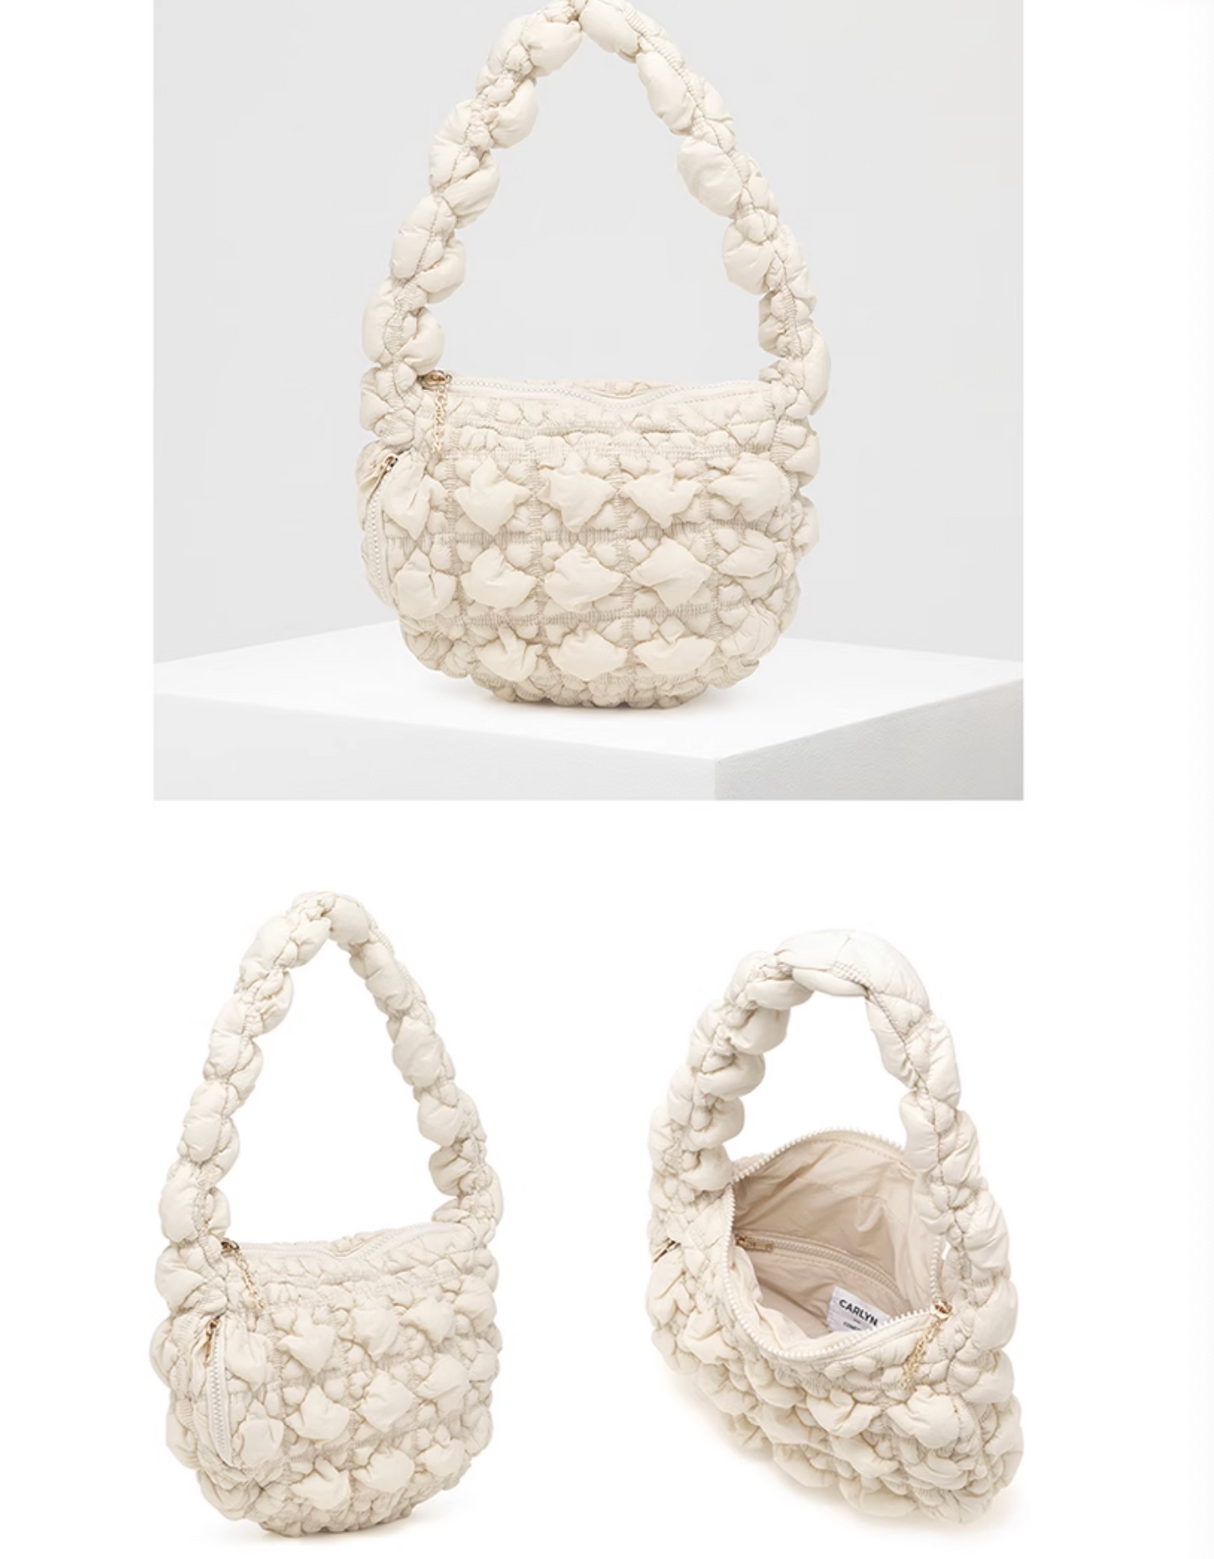 Where to buy the COS Quilted Bag and Carlyn Soft Bag everyone is